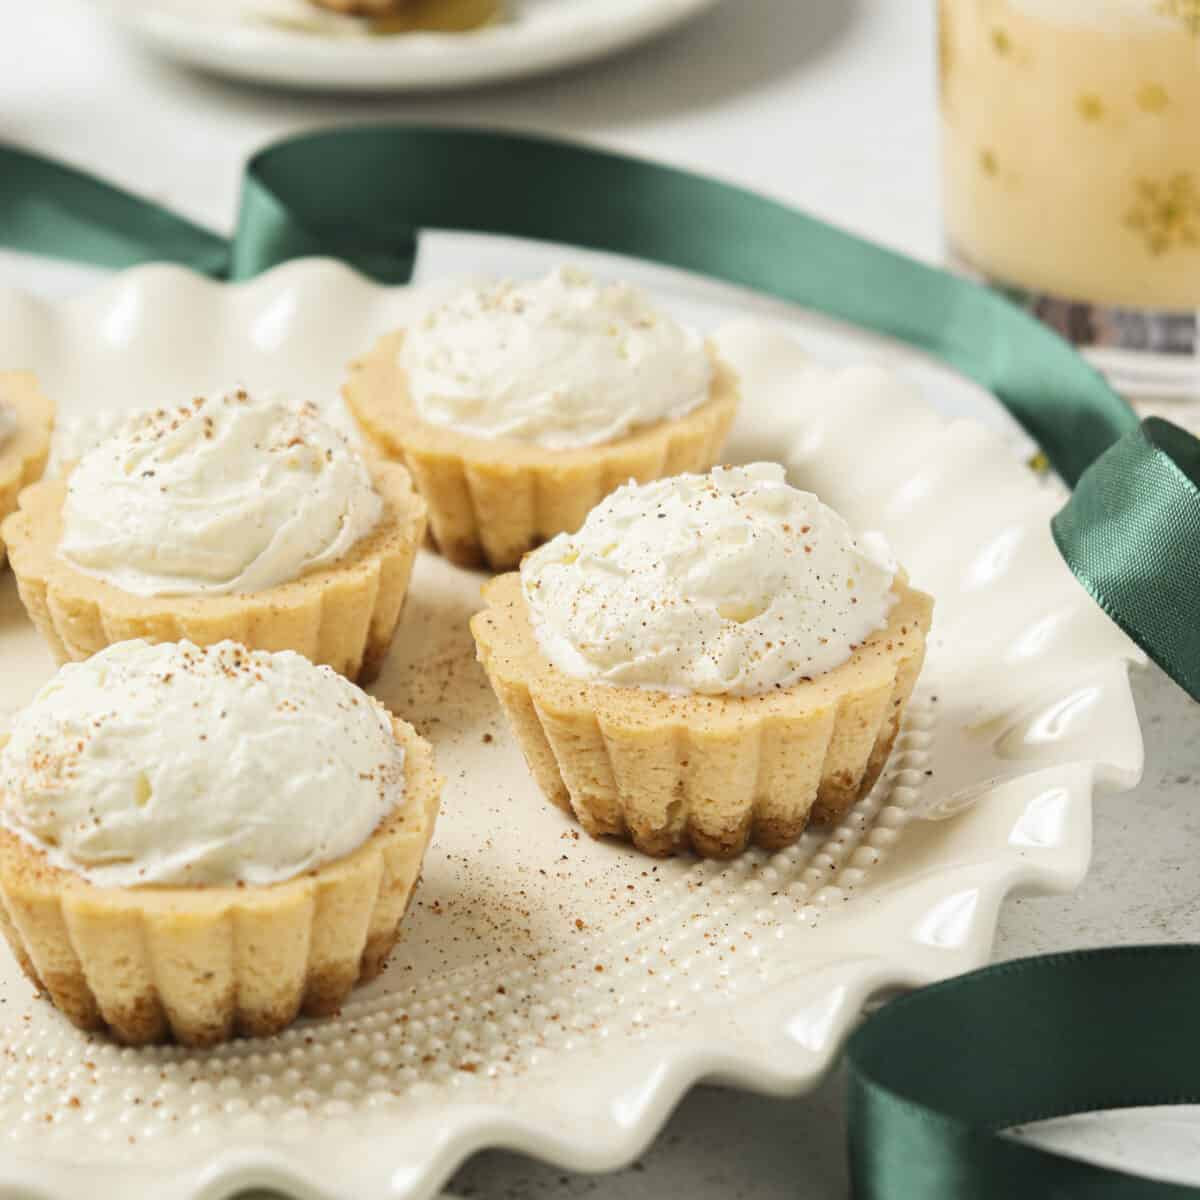 Mini cheesecakes with whipped cream on top and a green ribbon laid out.